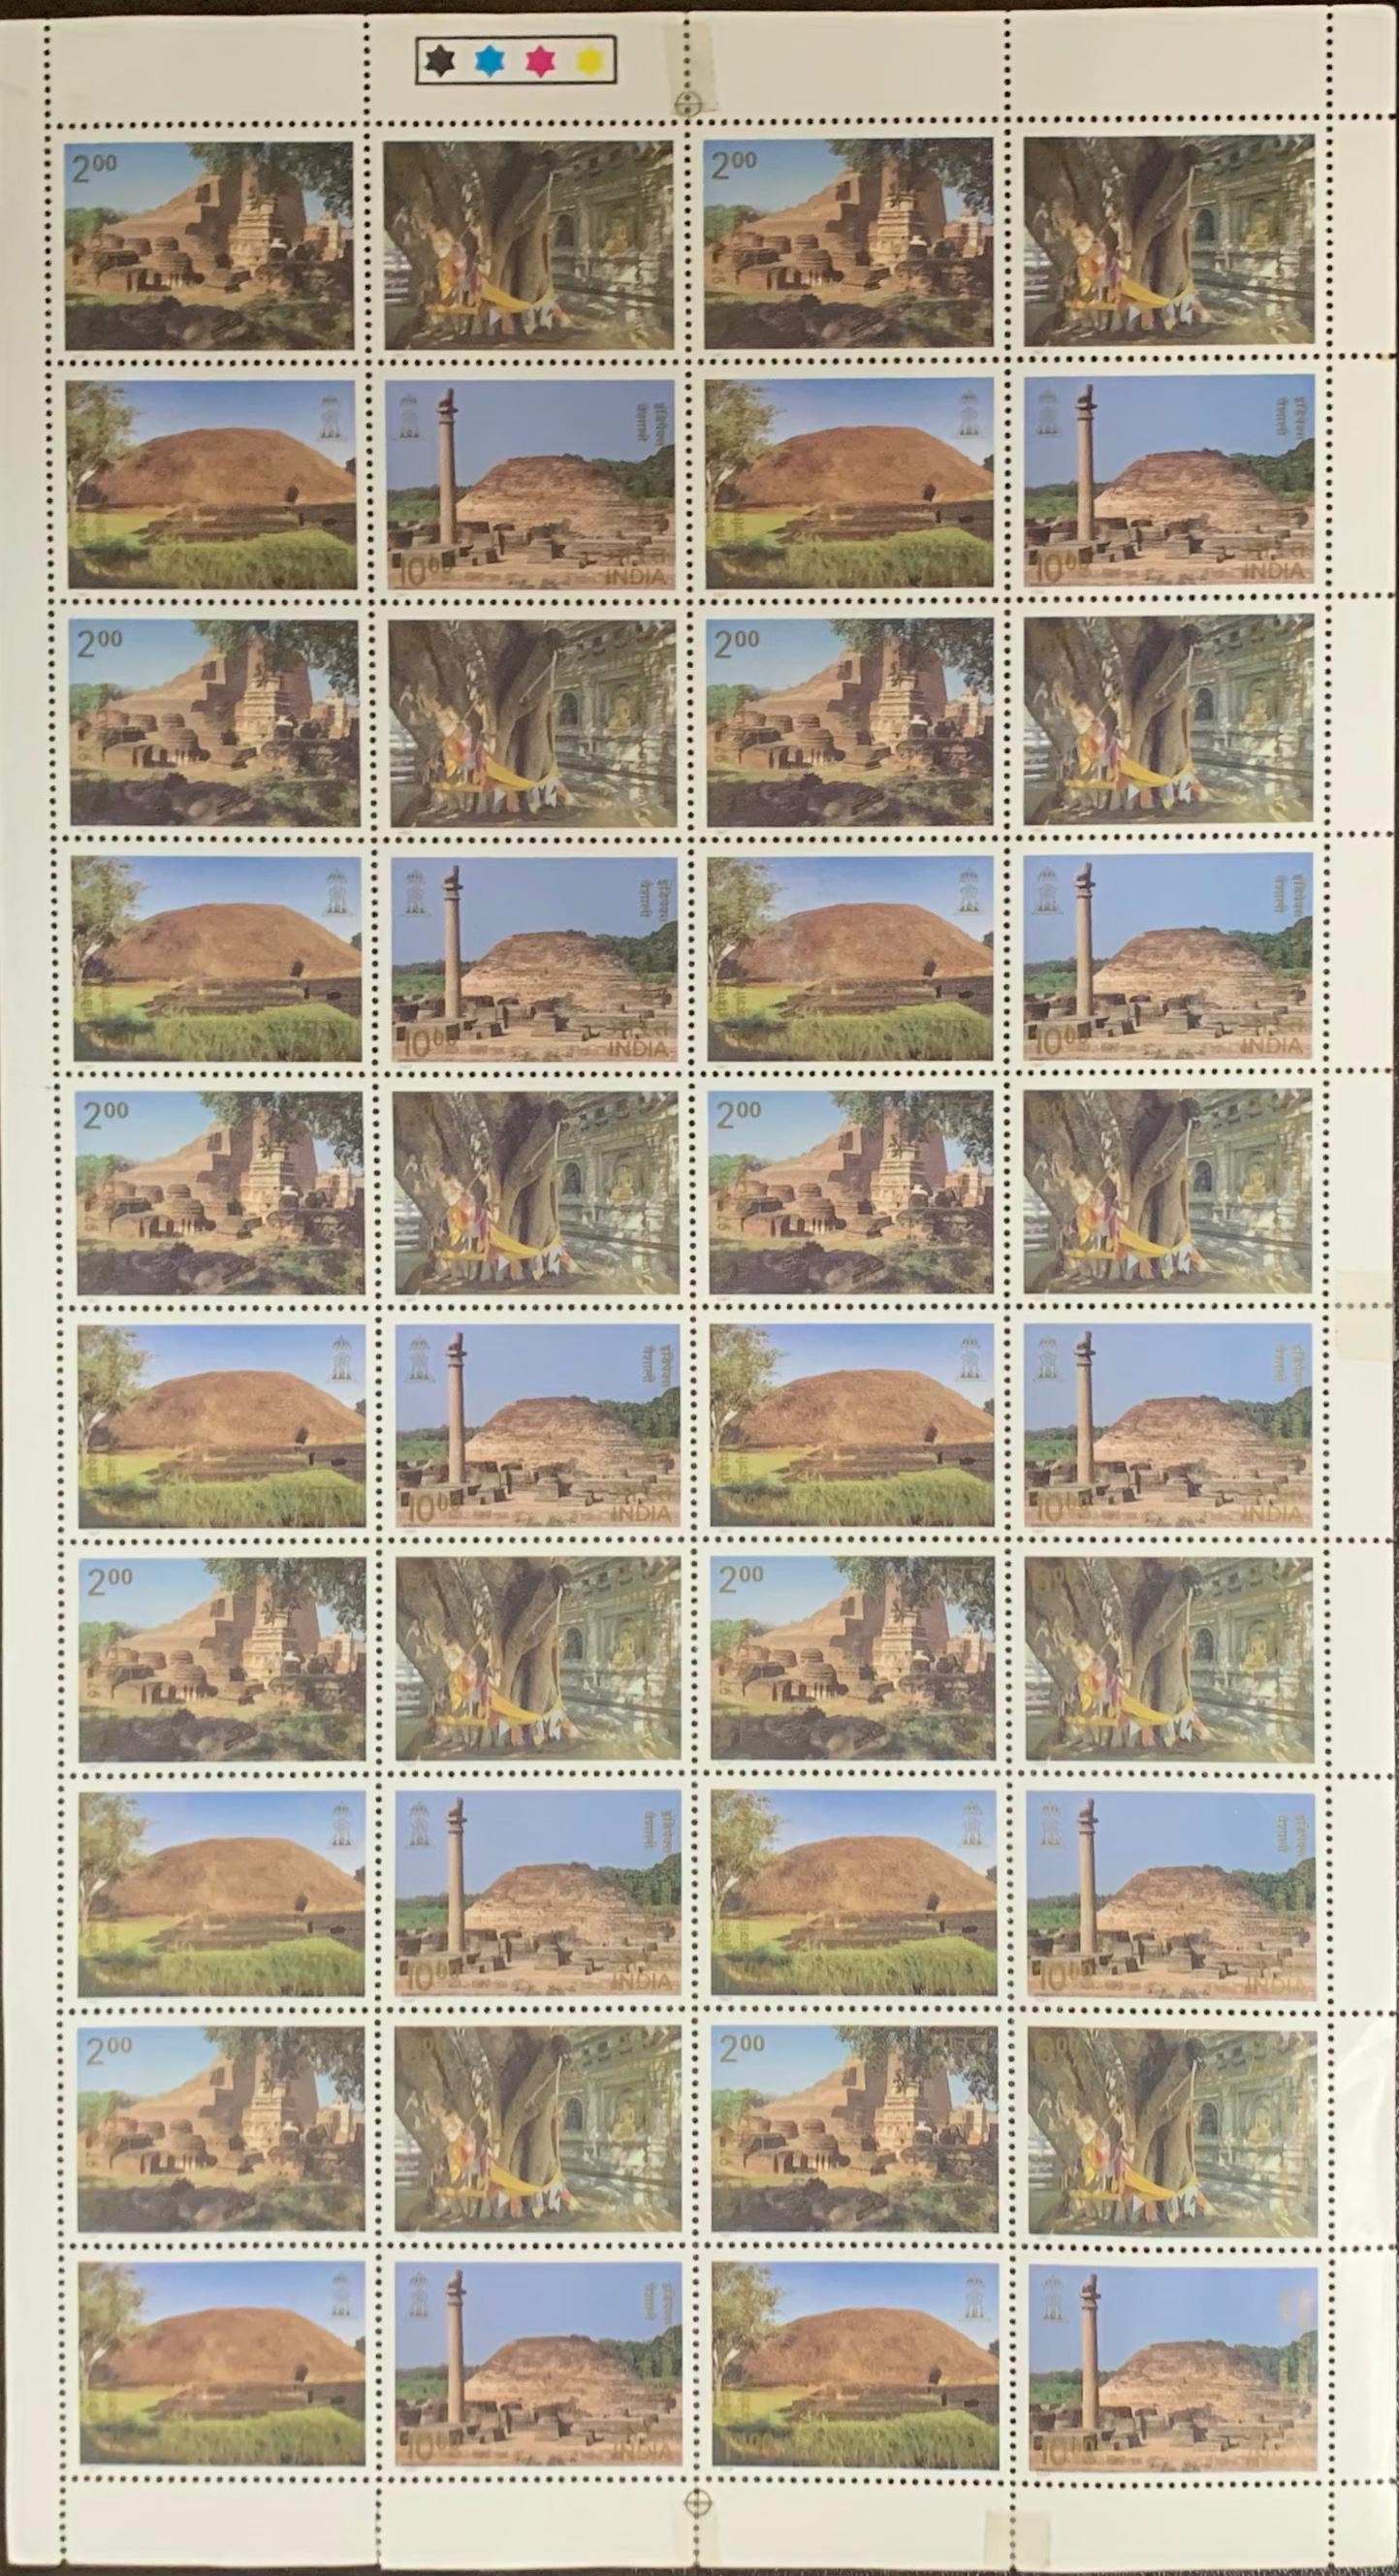 India 1997 International Stamp Exhibition, New Delhi (2nd Issue) Buddhists Cultural Sites Setenant Full Sheet